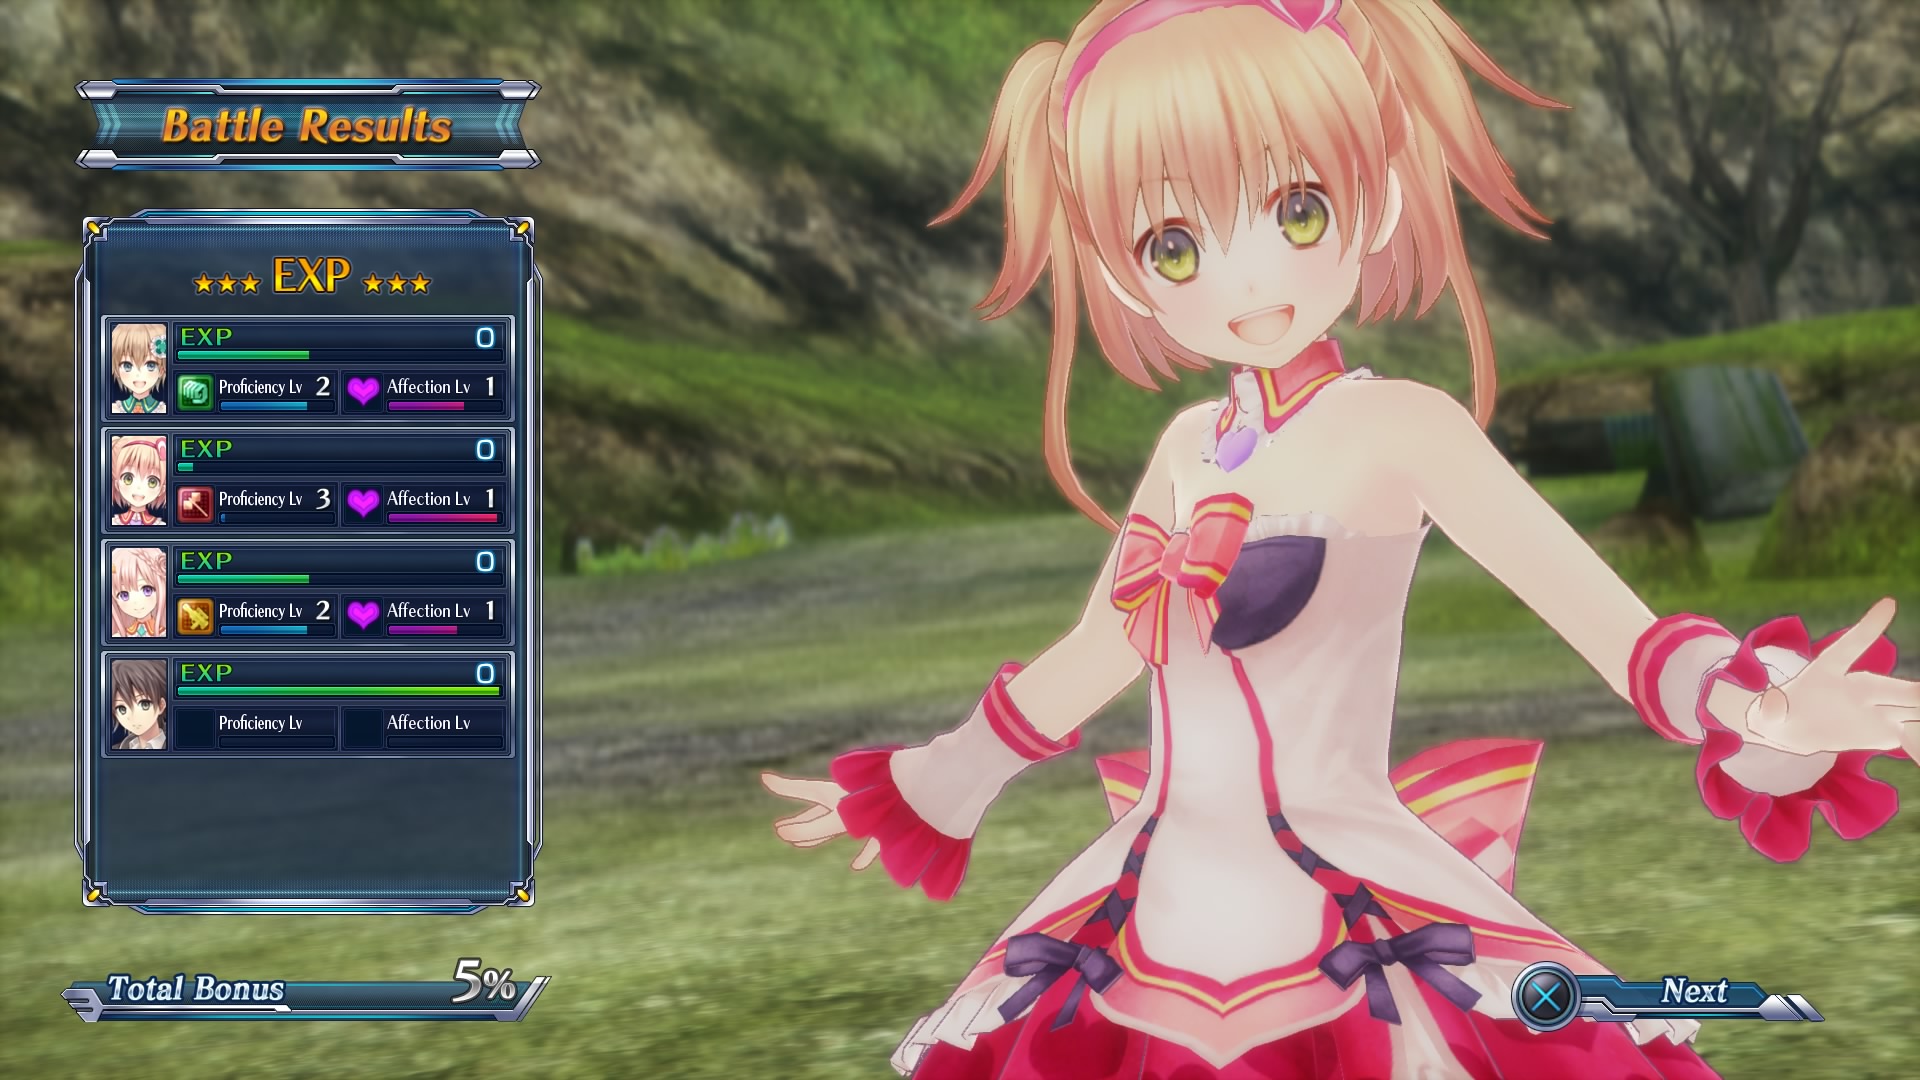 Omega Quintet (ACTUAL Game Review) – cublikefoot